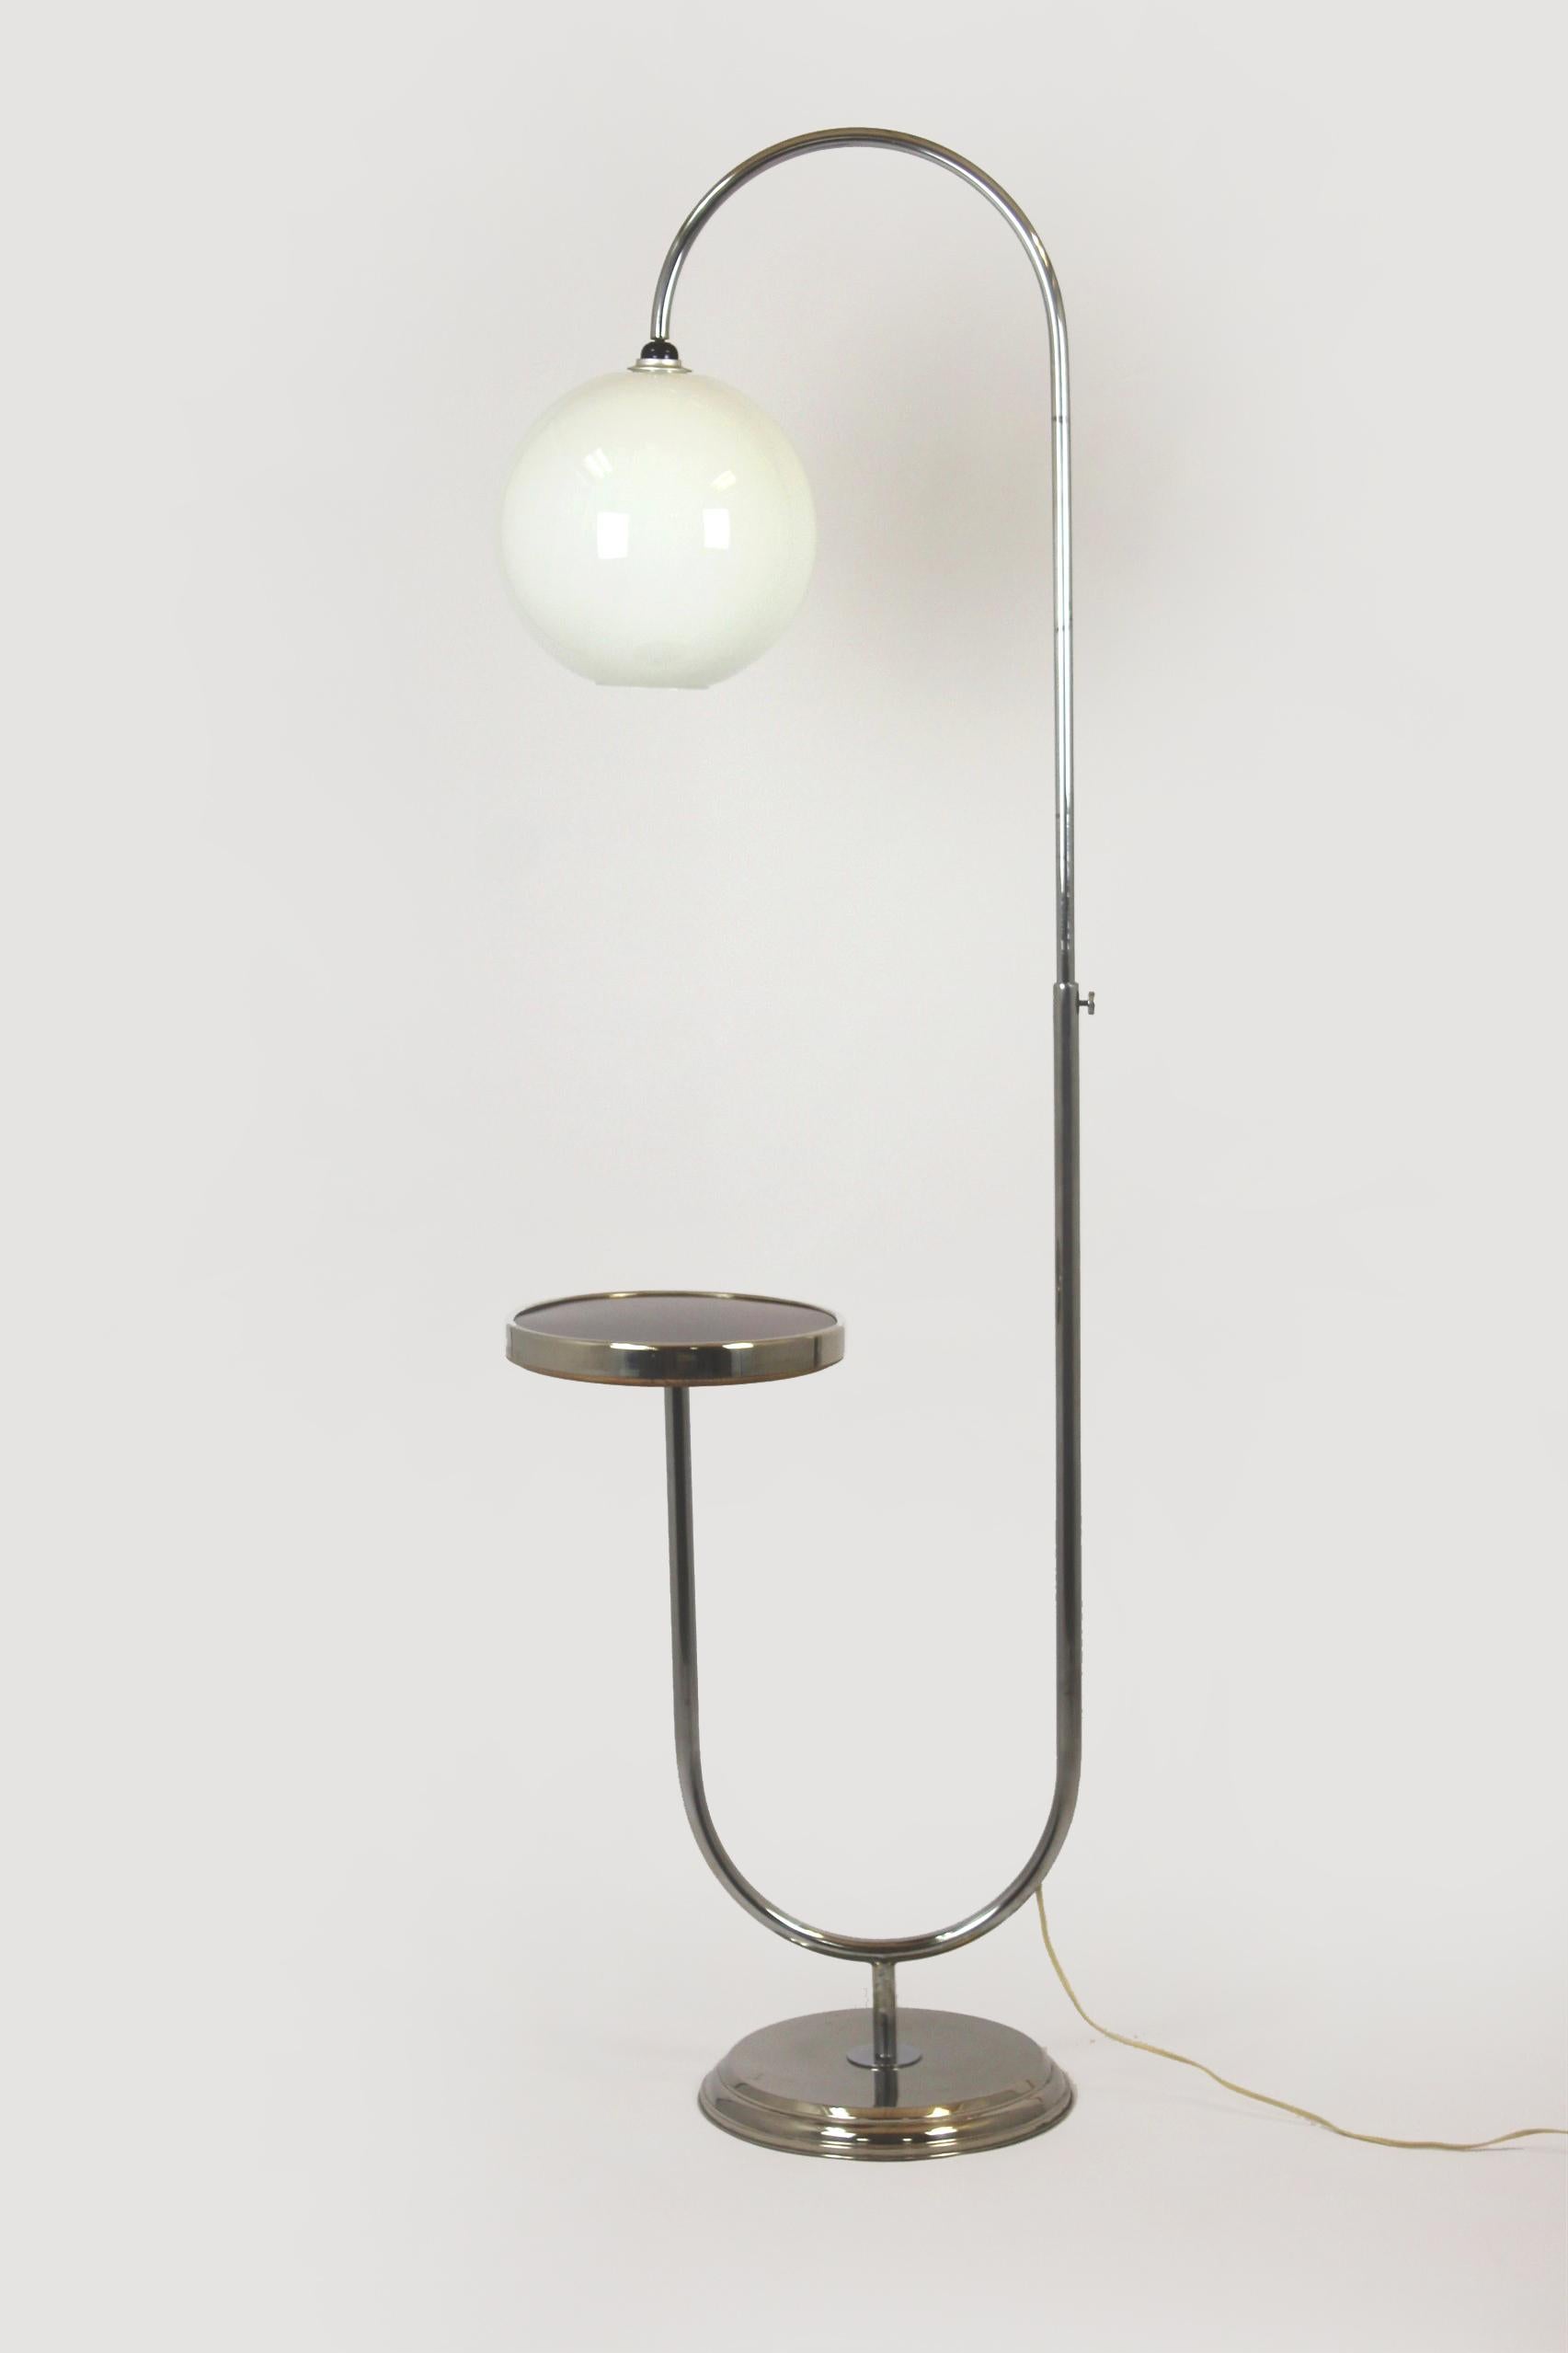 This floor lamp was produced in the 1940s in Czechoslovakia.
Original, good condition, the lamp is in working order. The height of the lamp is adjustable.